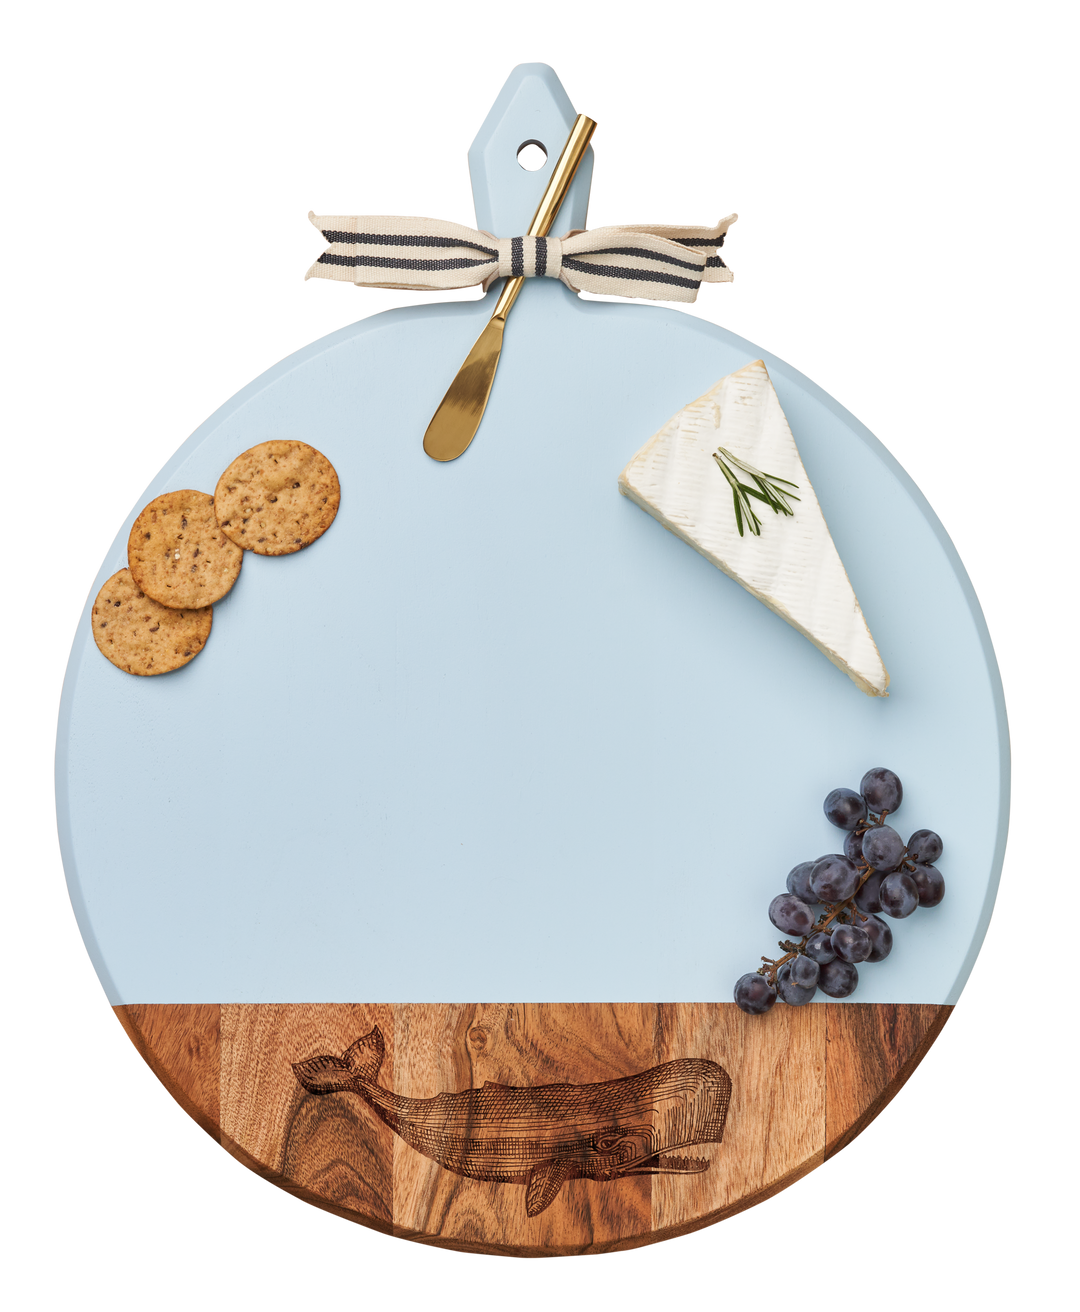 Acacia Heirloom Board with Handle Round & Gold Spreader Tied with Gray & White Ribbon | Whale | 20 x 16"